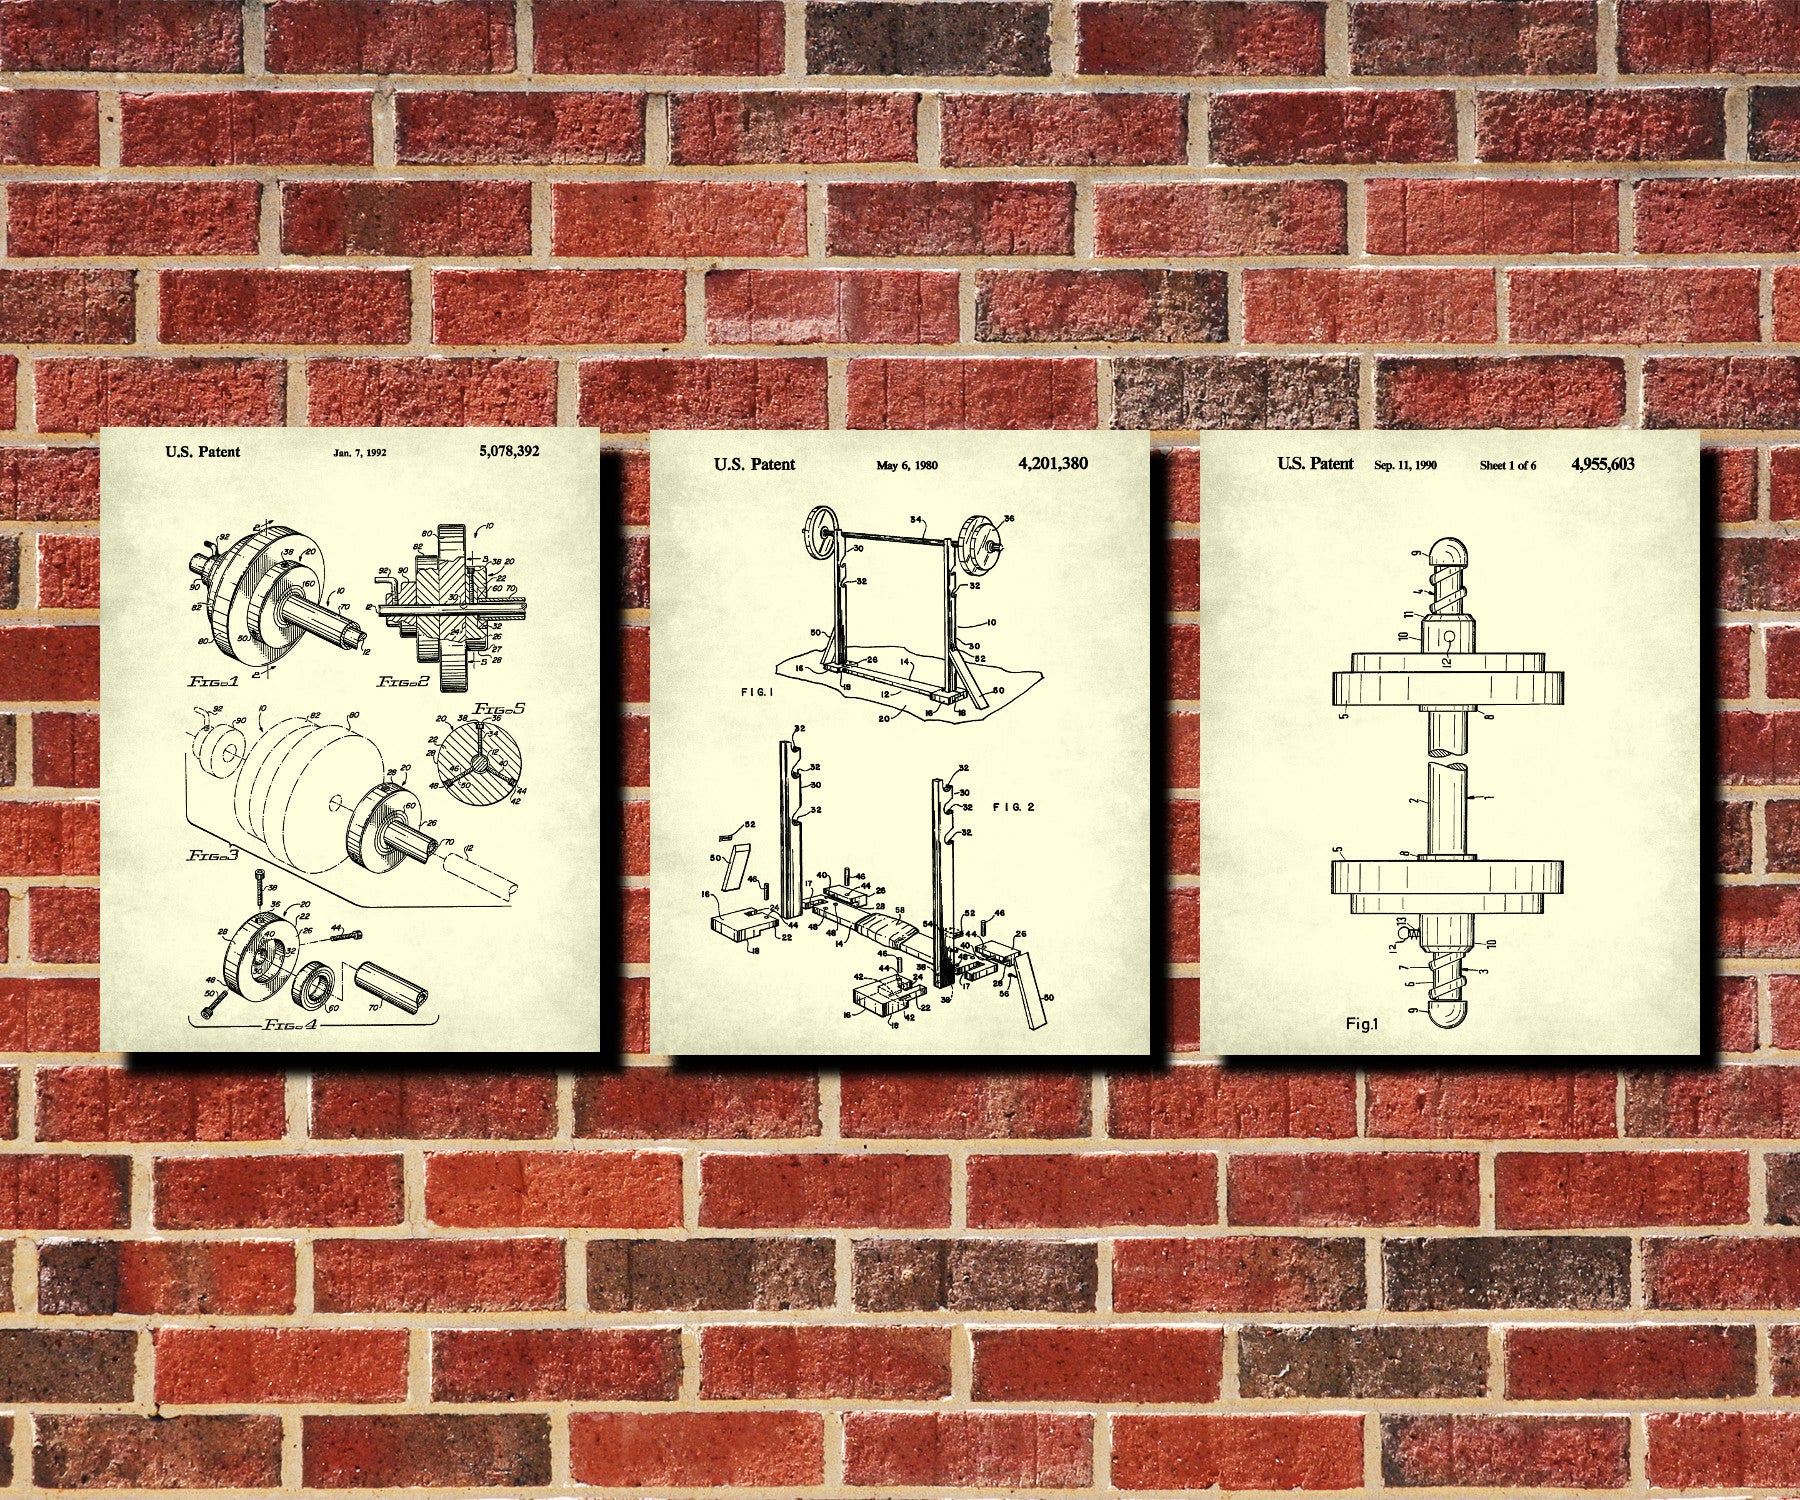 Weight Lifting Patent Prints Set 3 Fitness Blueprint Posters